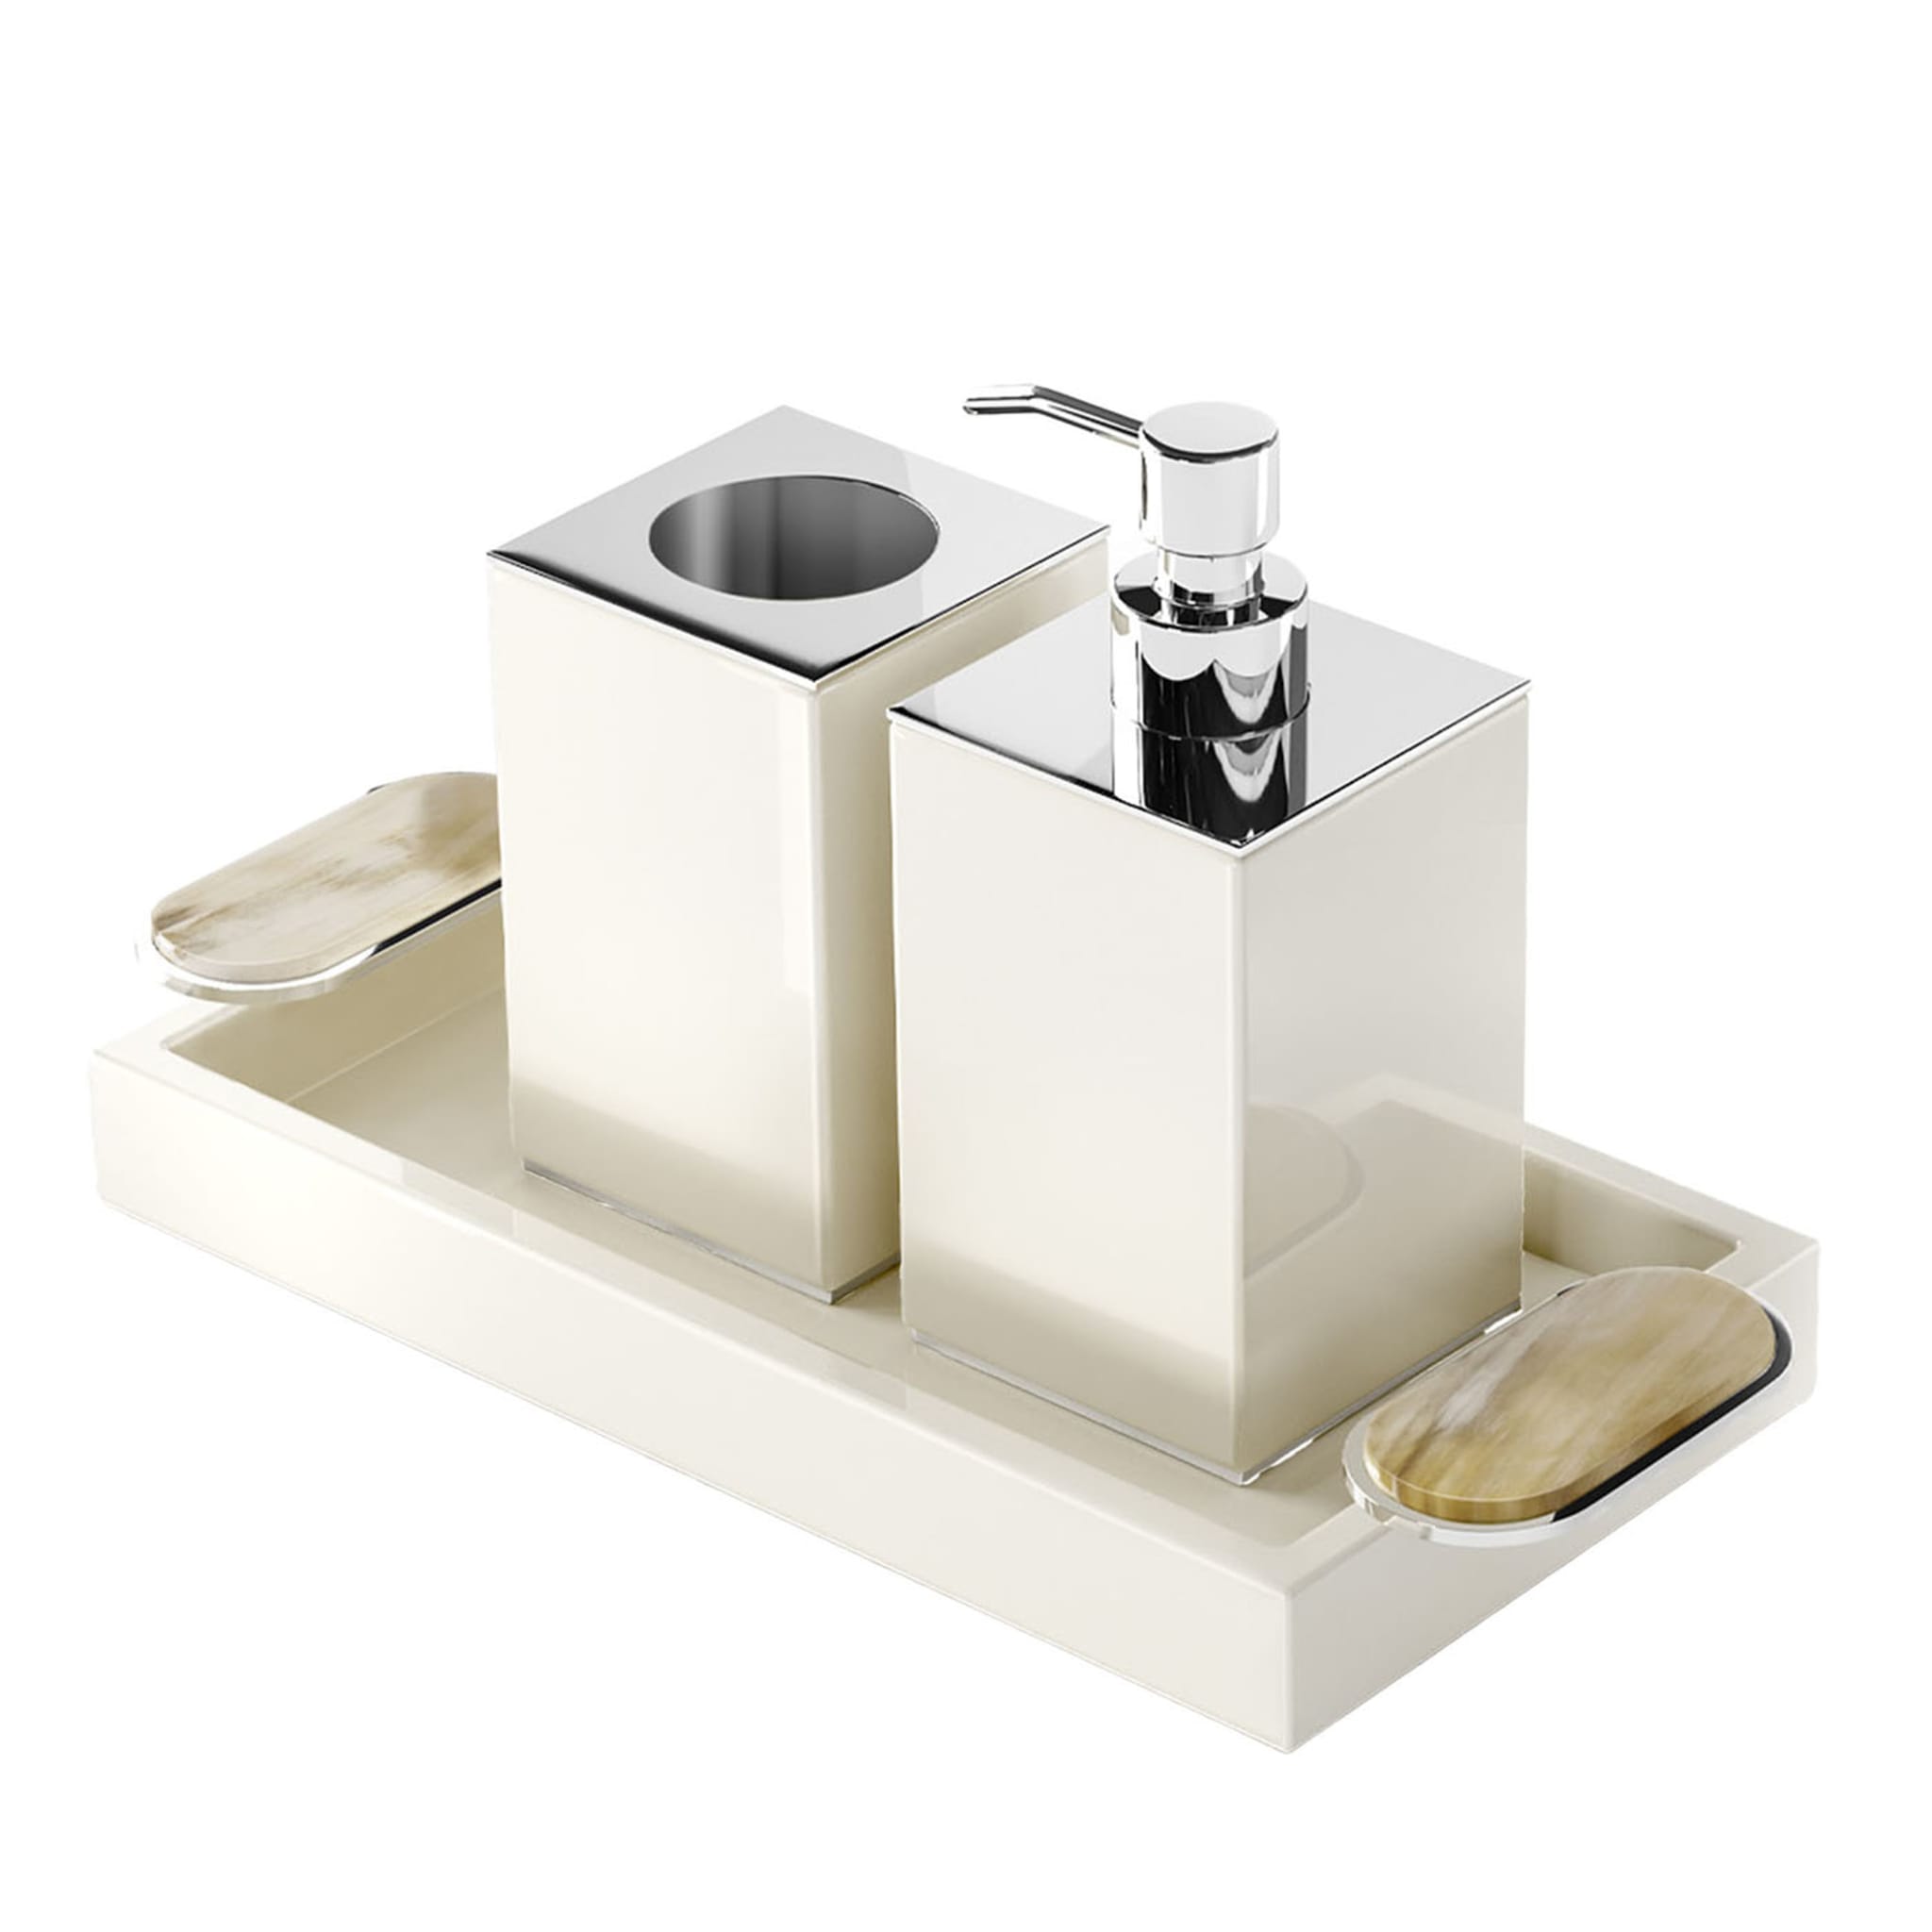 Argentella Ivory Set of Soap Dispenser and Toothbrush Holder - Main view